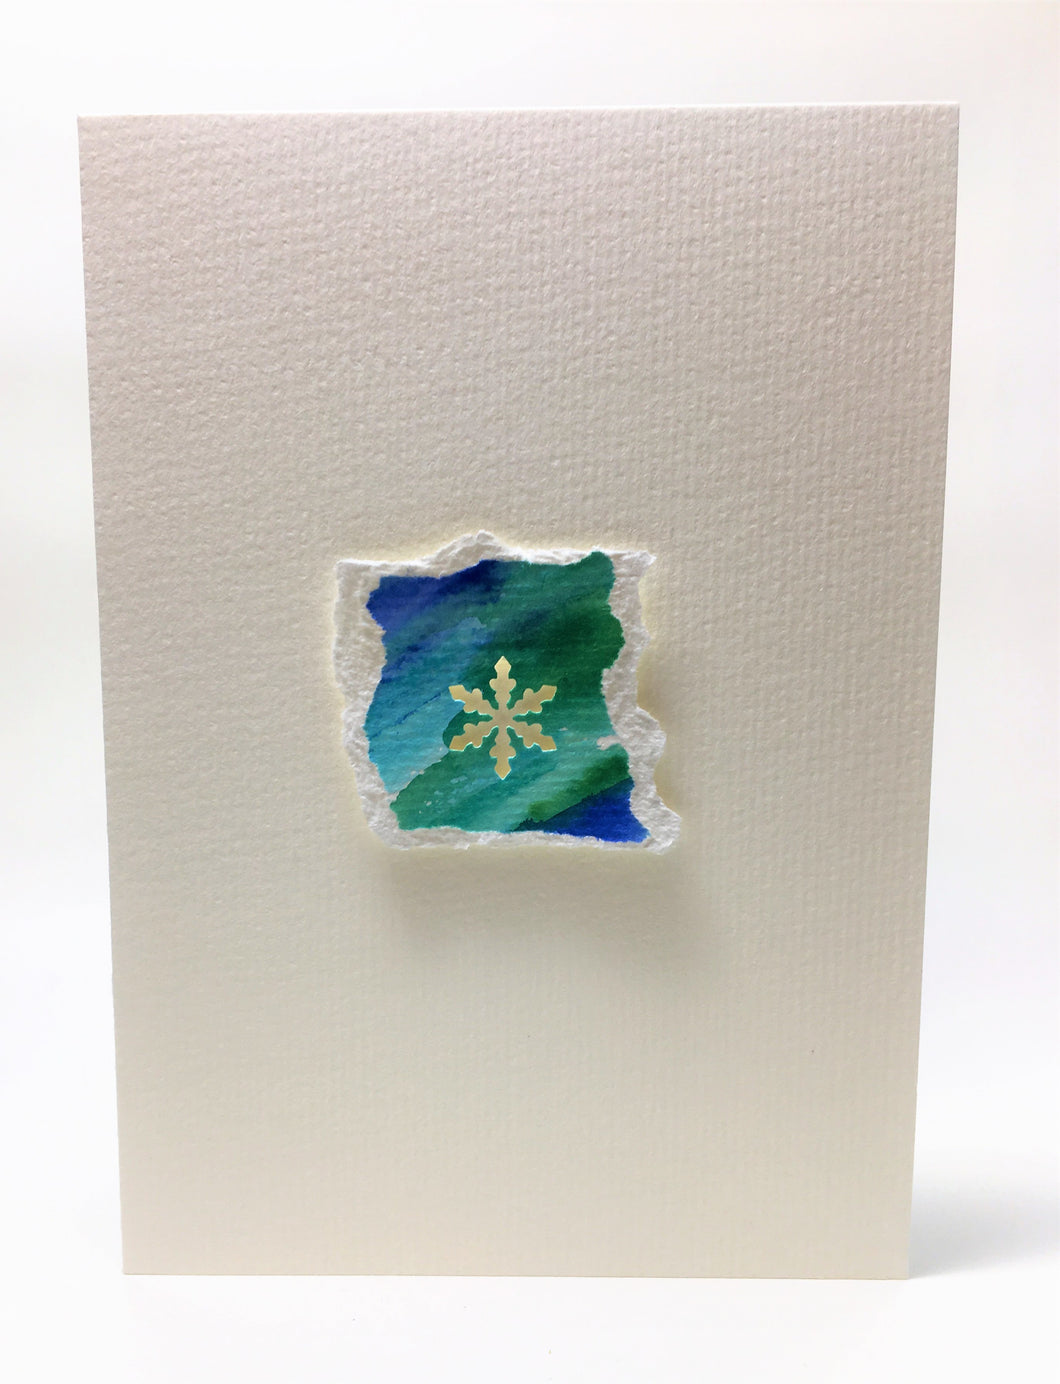 Original Hand Painted Christmas Card - Snowflake Collection - Blue/Green 1 - eDgE dEsiGn London